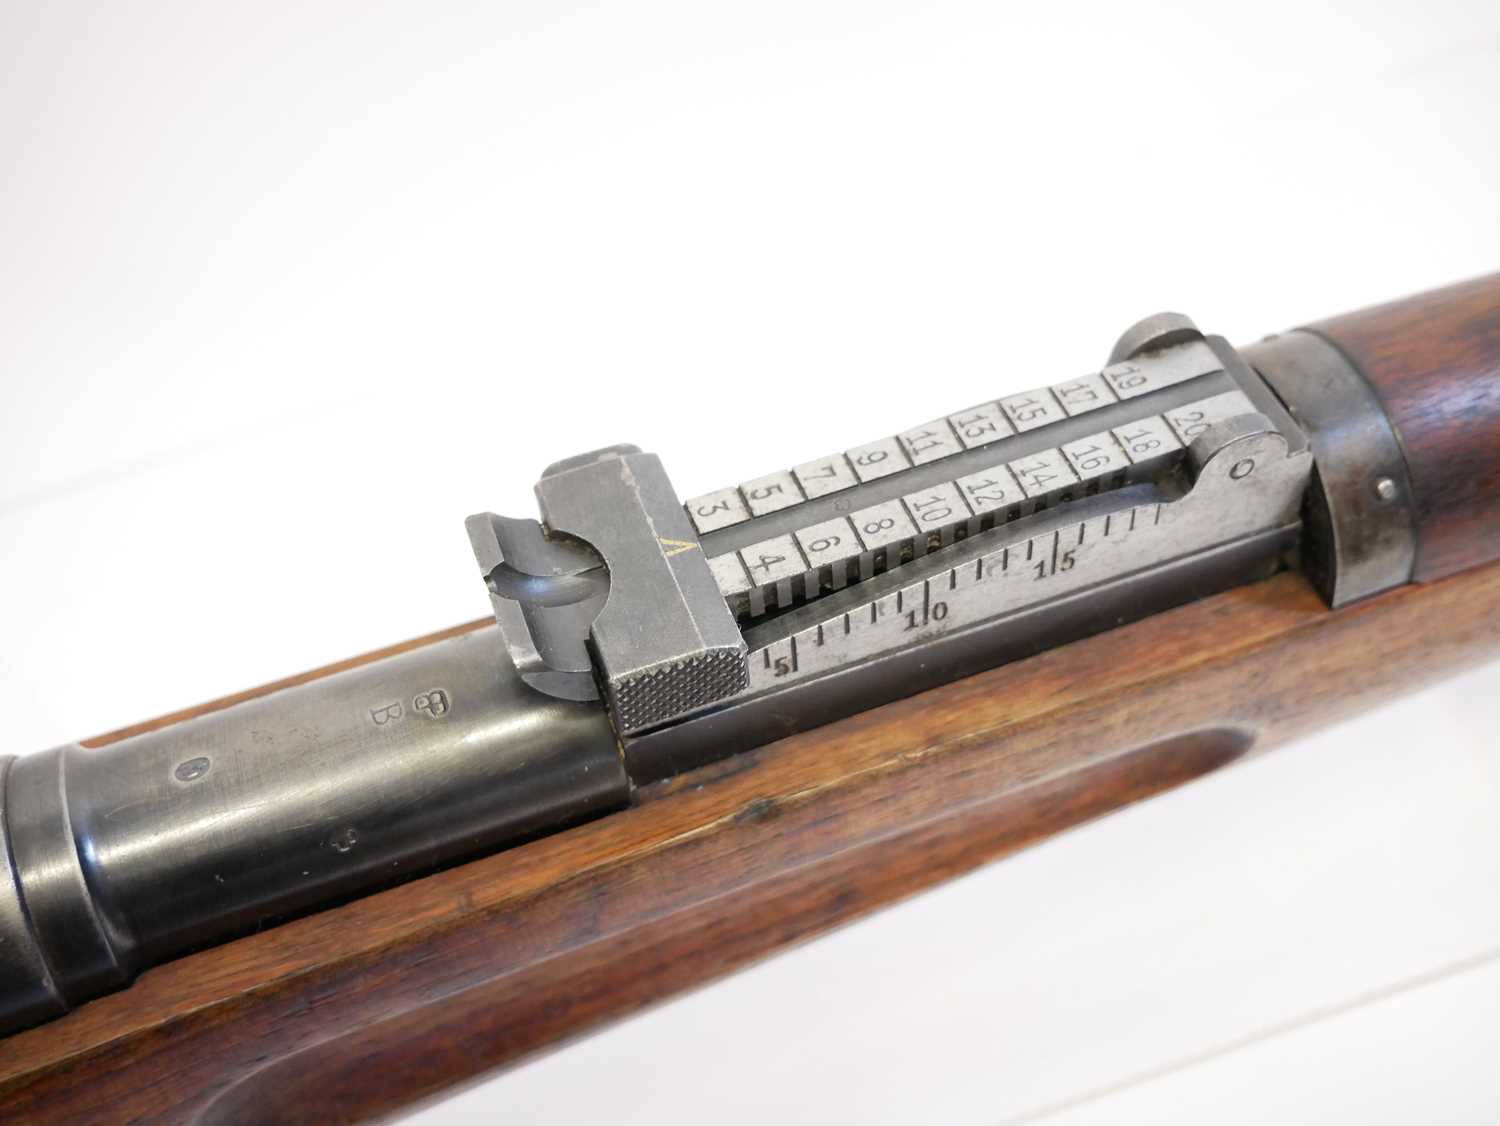 Schmidt Rubin 1896 7.5mm straight pull rifle, matching serial numbers 268510 to barrel, receiver, - Image 5 of 15